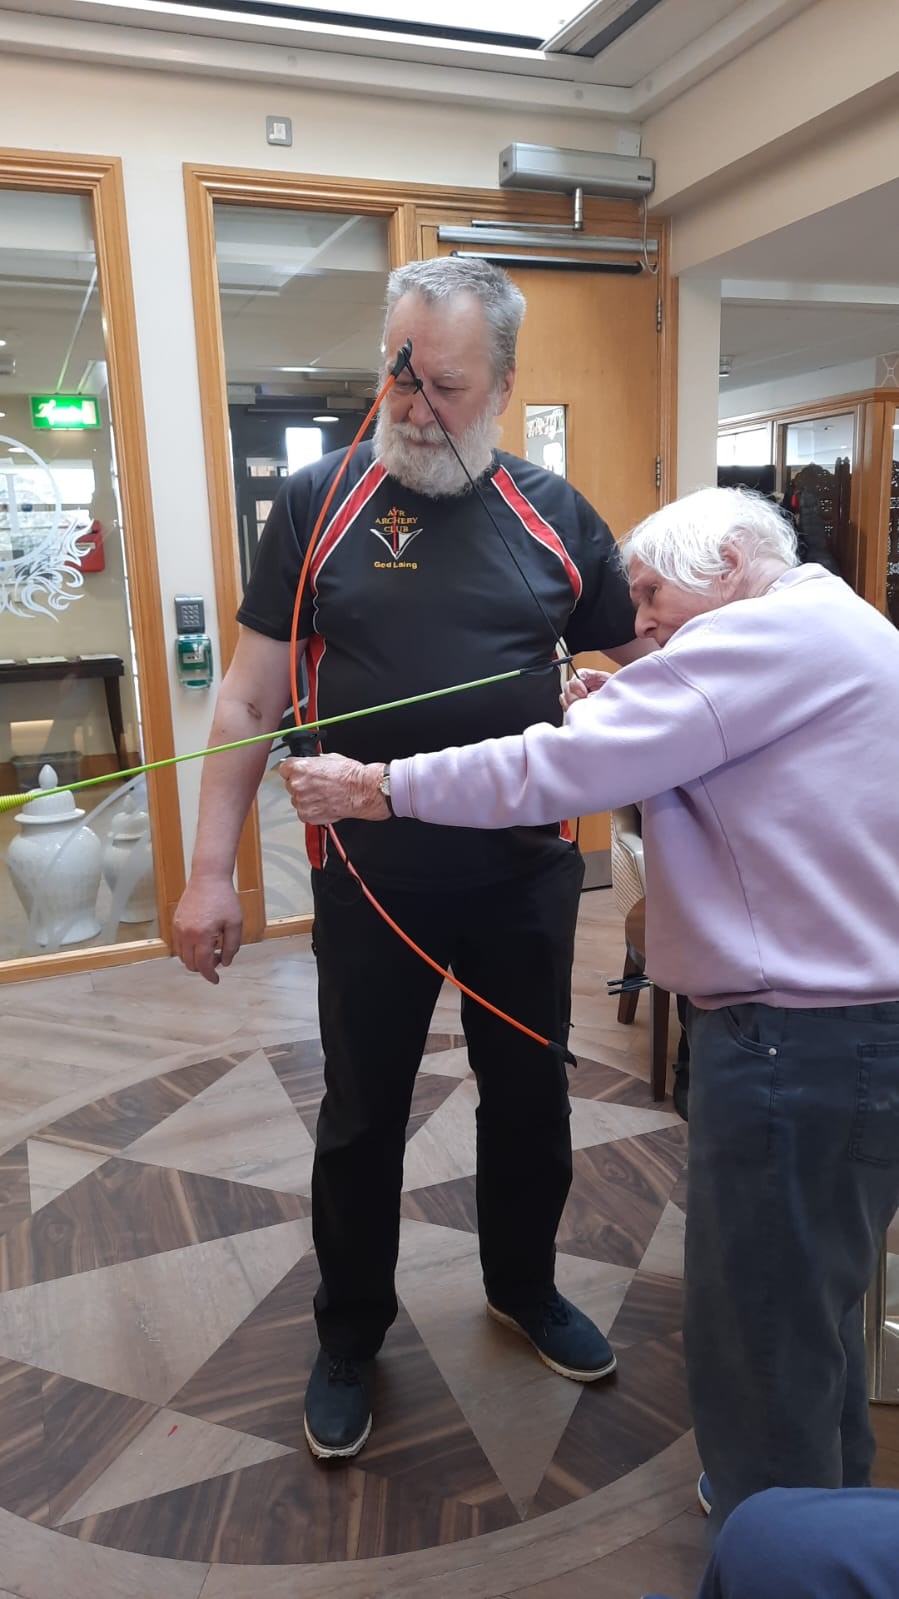 Resident Partaking in Archery With The Help of Jed